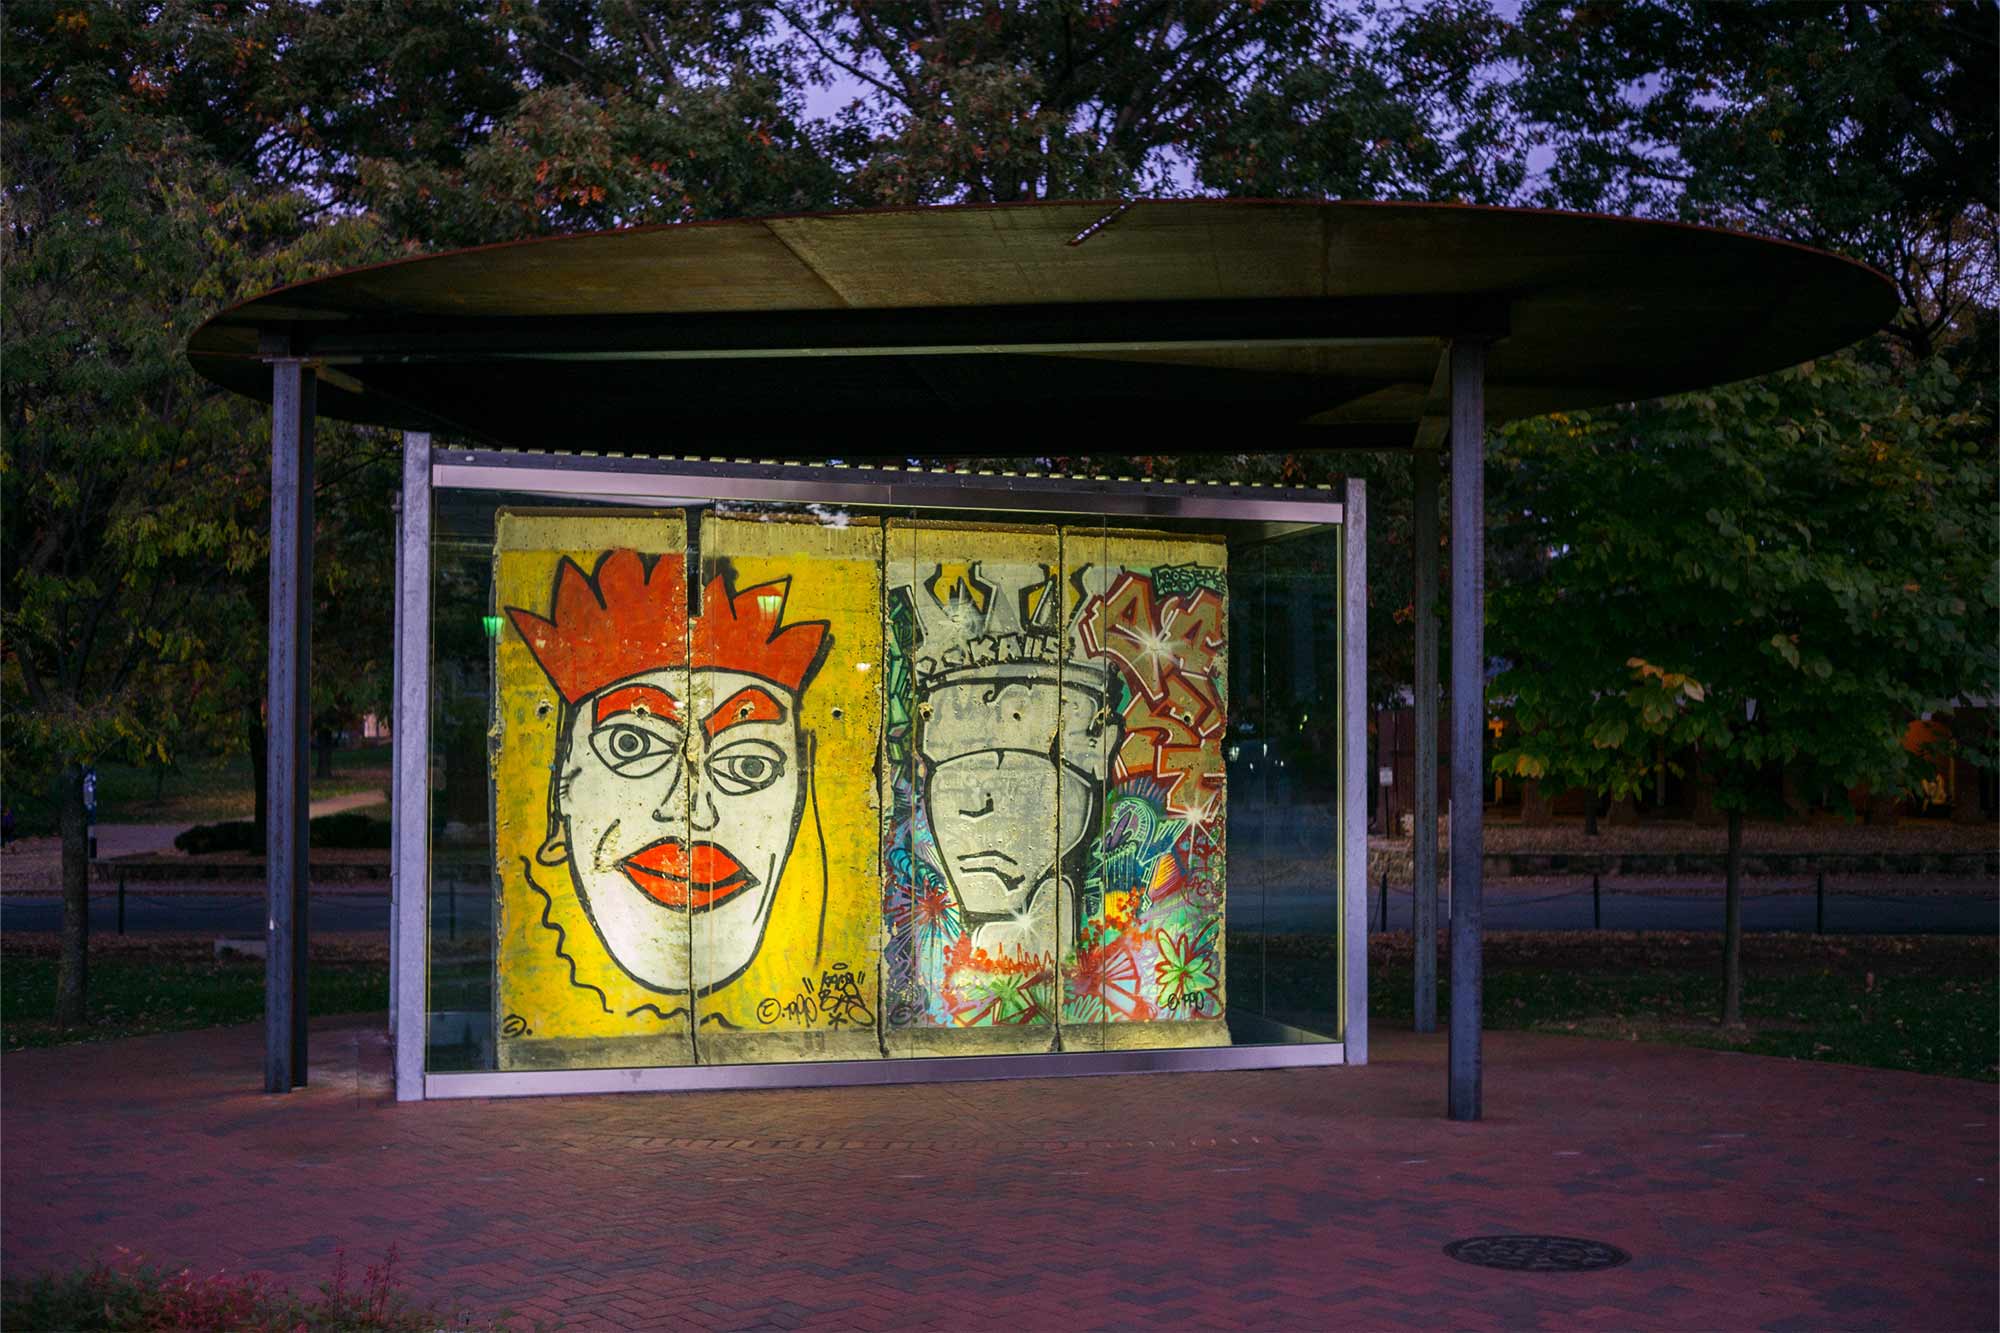 Two graffitied wall panels on display under an awning